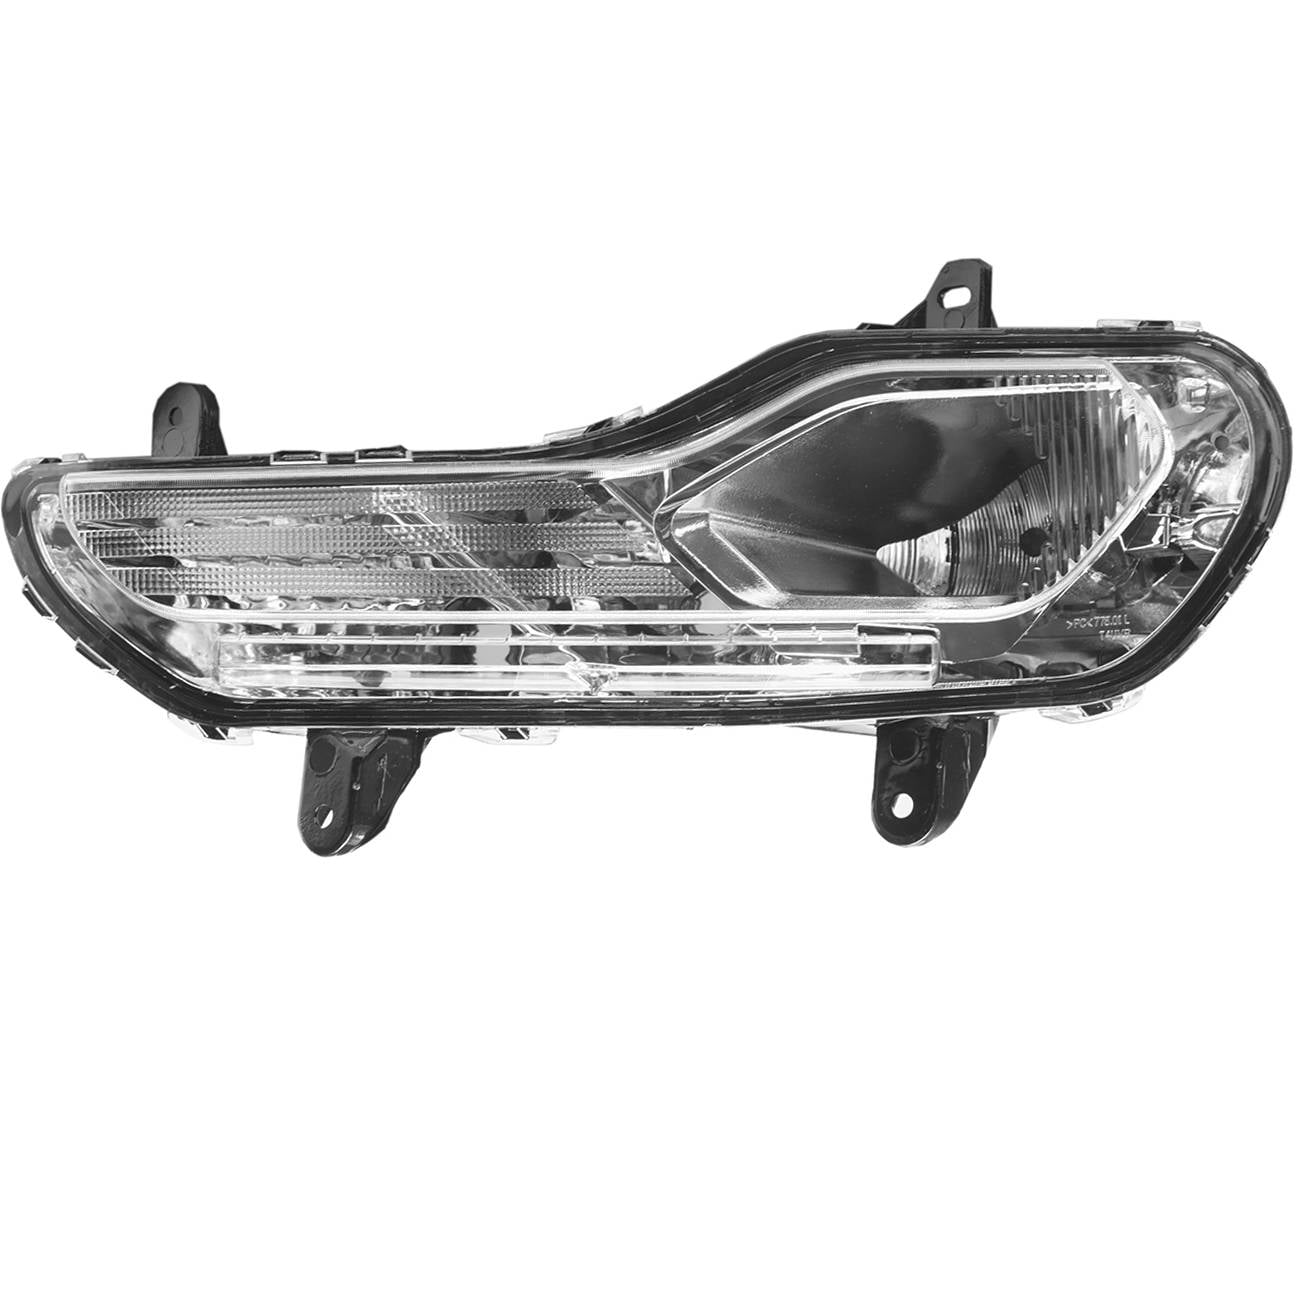 Parking Light for Ford Escape 2013-2016 Park Lamp Right Assembly W/Fog Lamps Right Side 